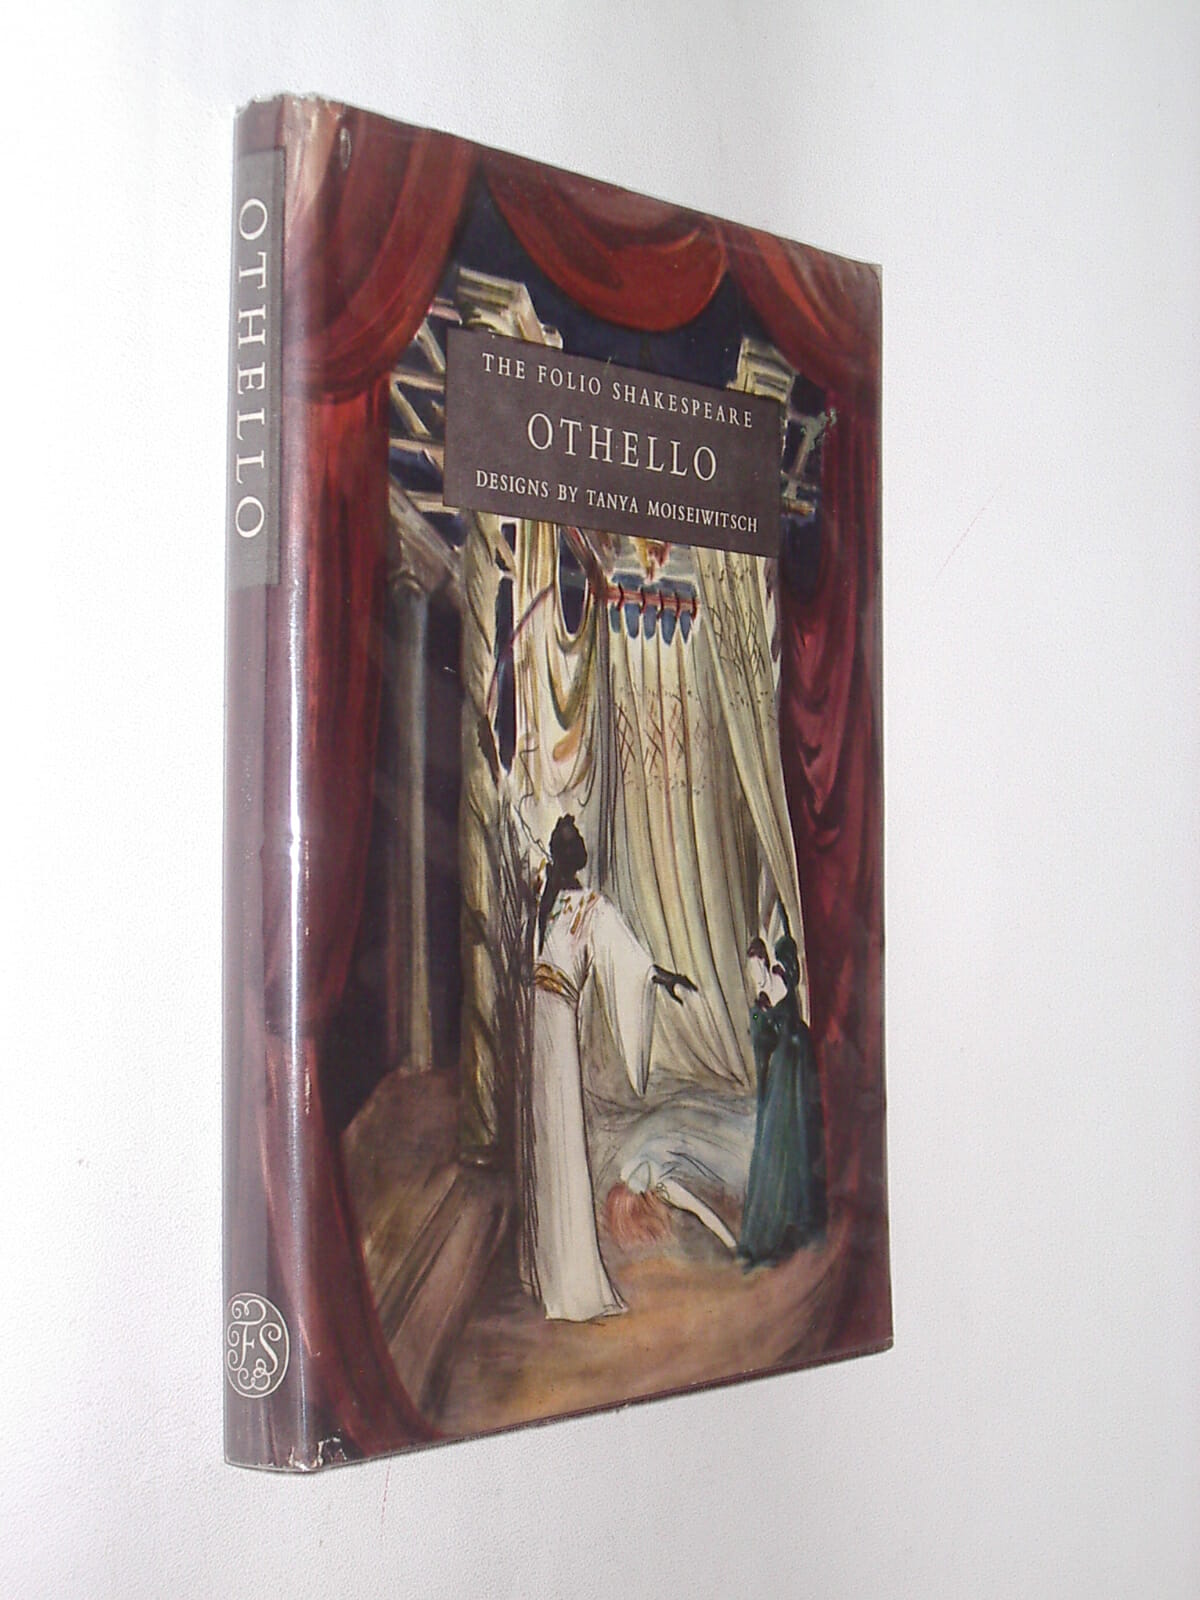 othello by william shakespeare